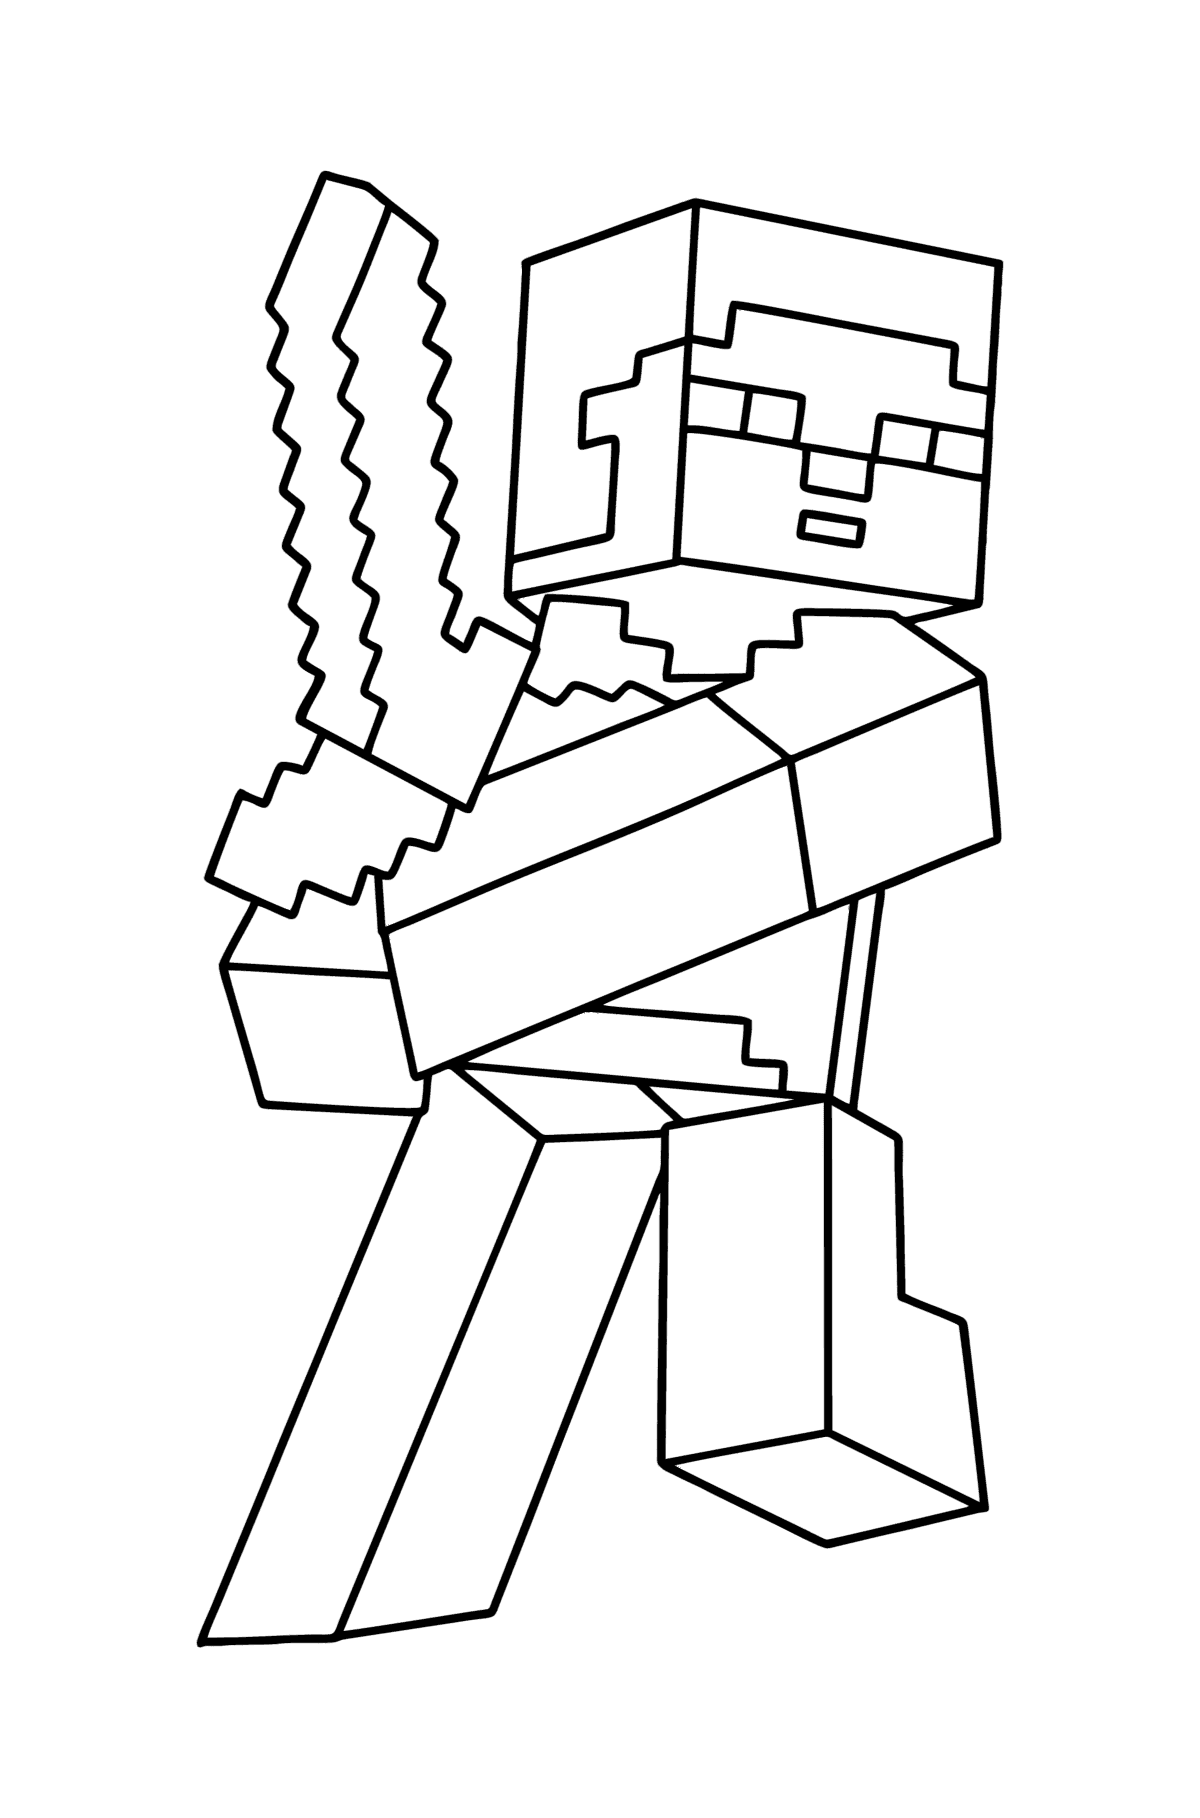 Minecraft Steve coloring page ♥ Online and Print for Free